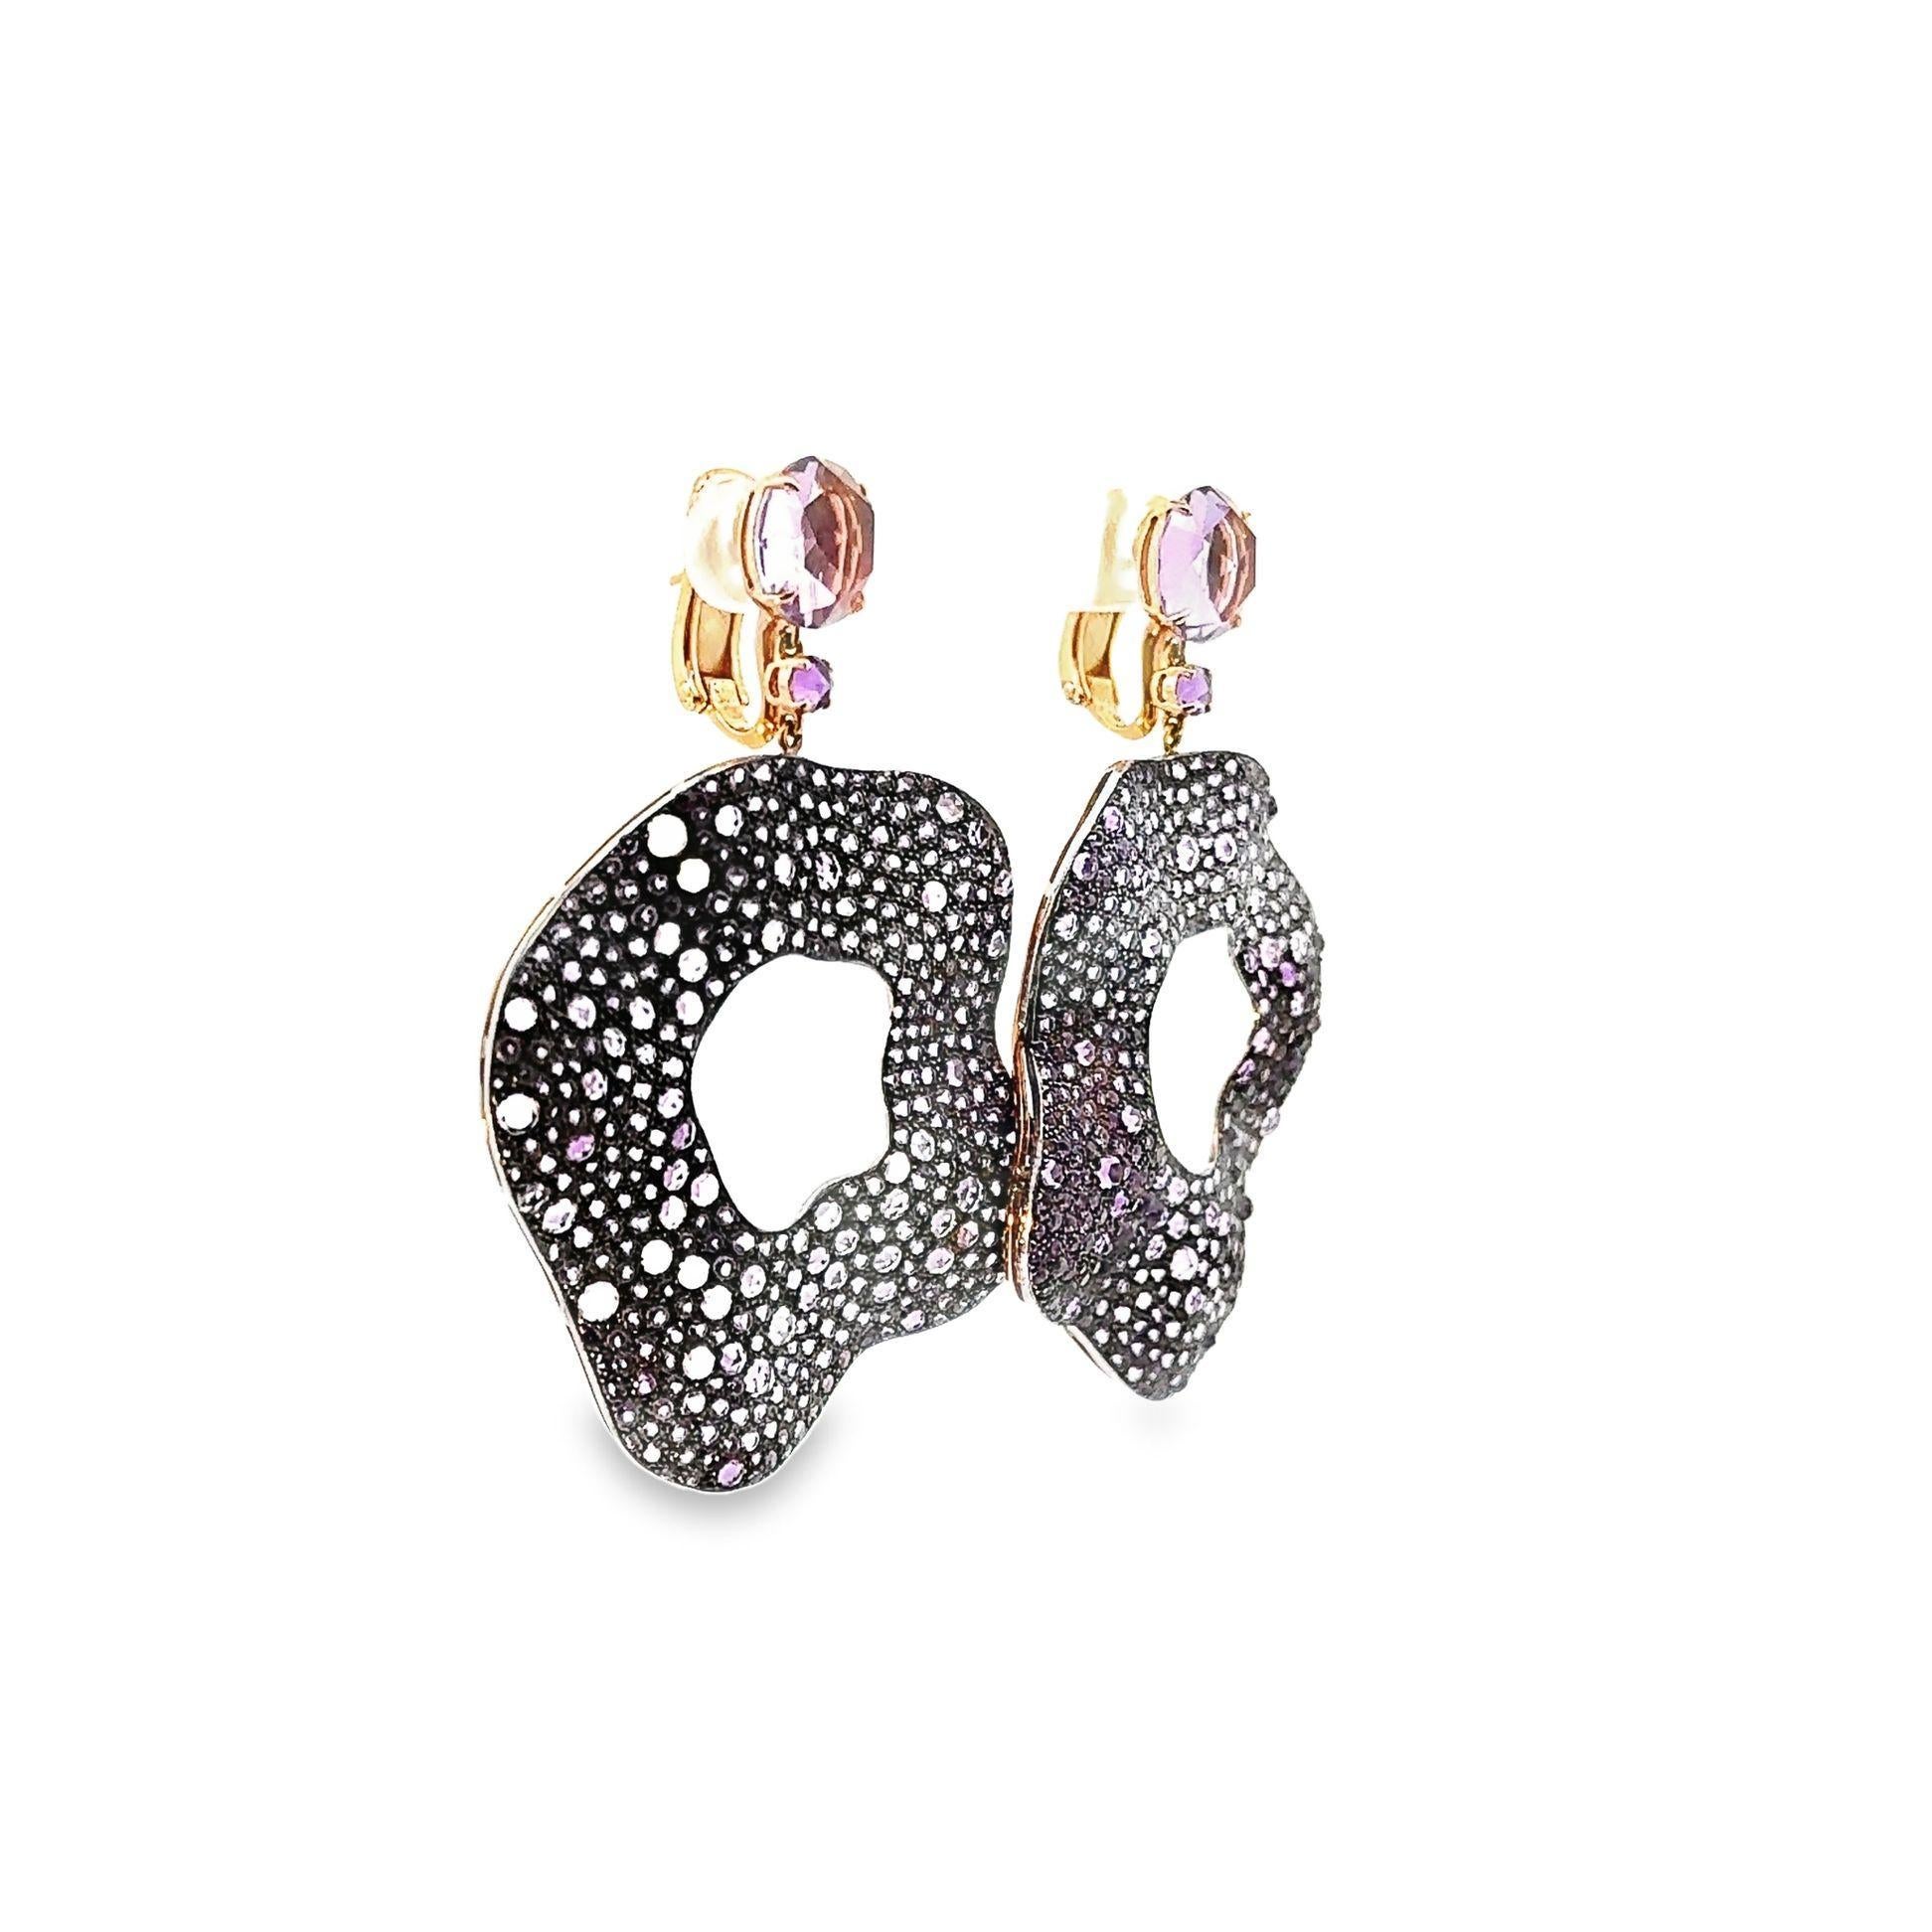 Made in 18k rose and white gold, this pair of dangle earrings are ideal for those who love statement jewelry with added sparkle. Make these organic and floral inspired earrings your new timeless piece in your jewelry box. They are adorned with 26.70